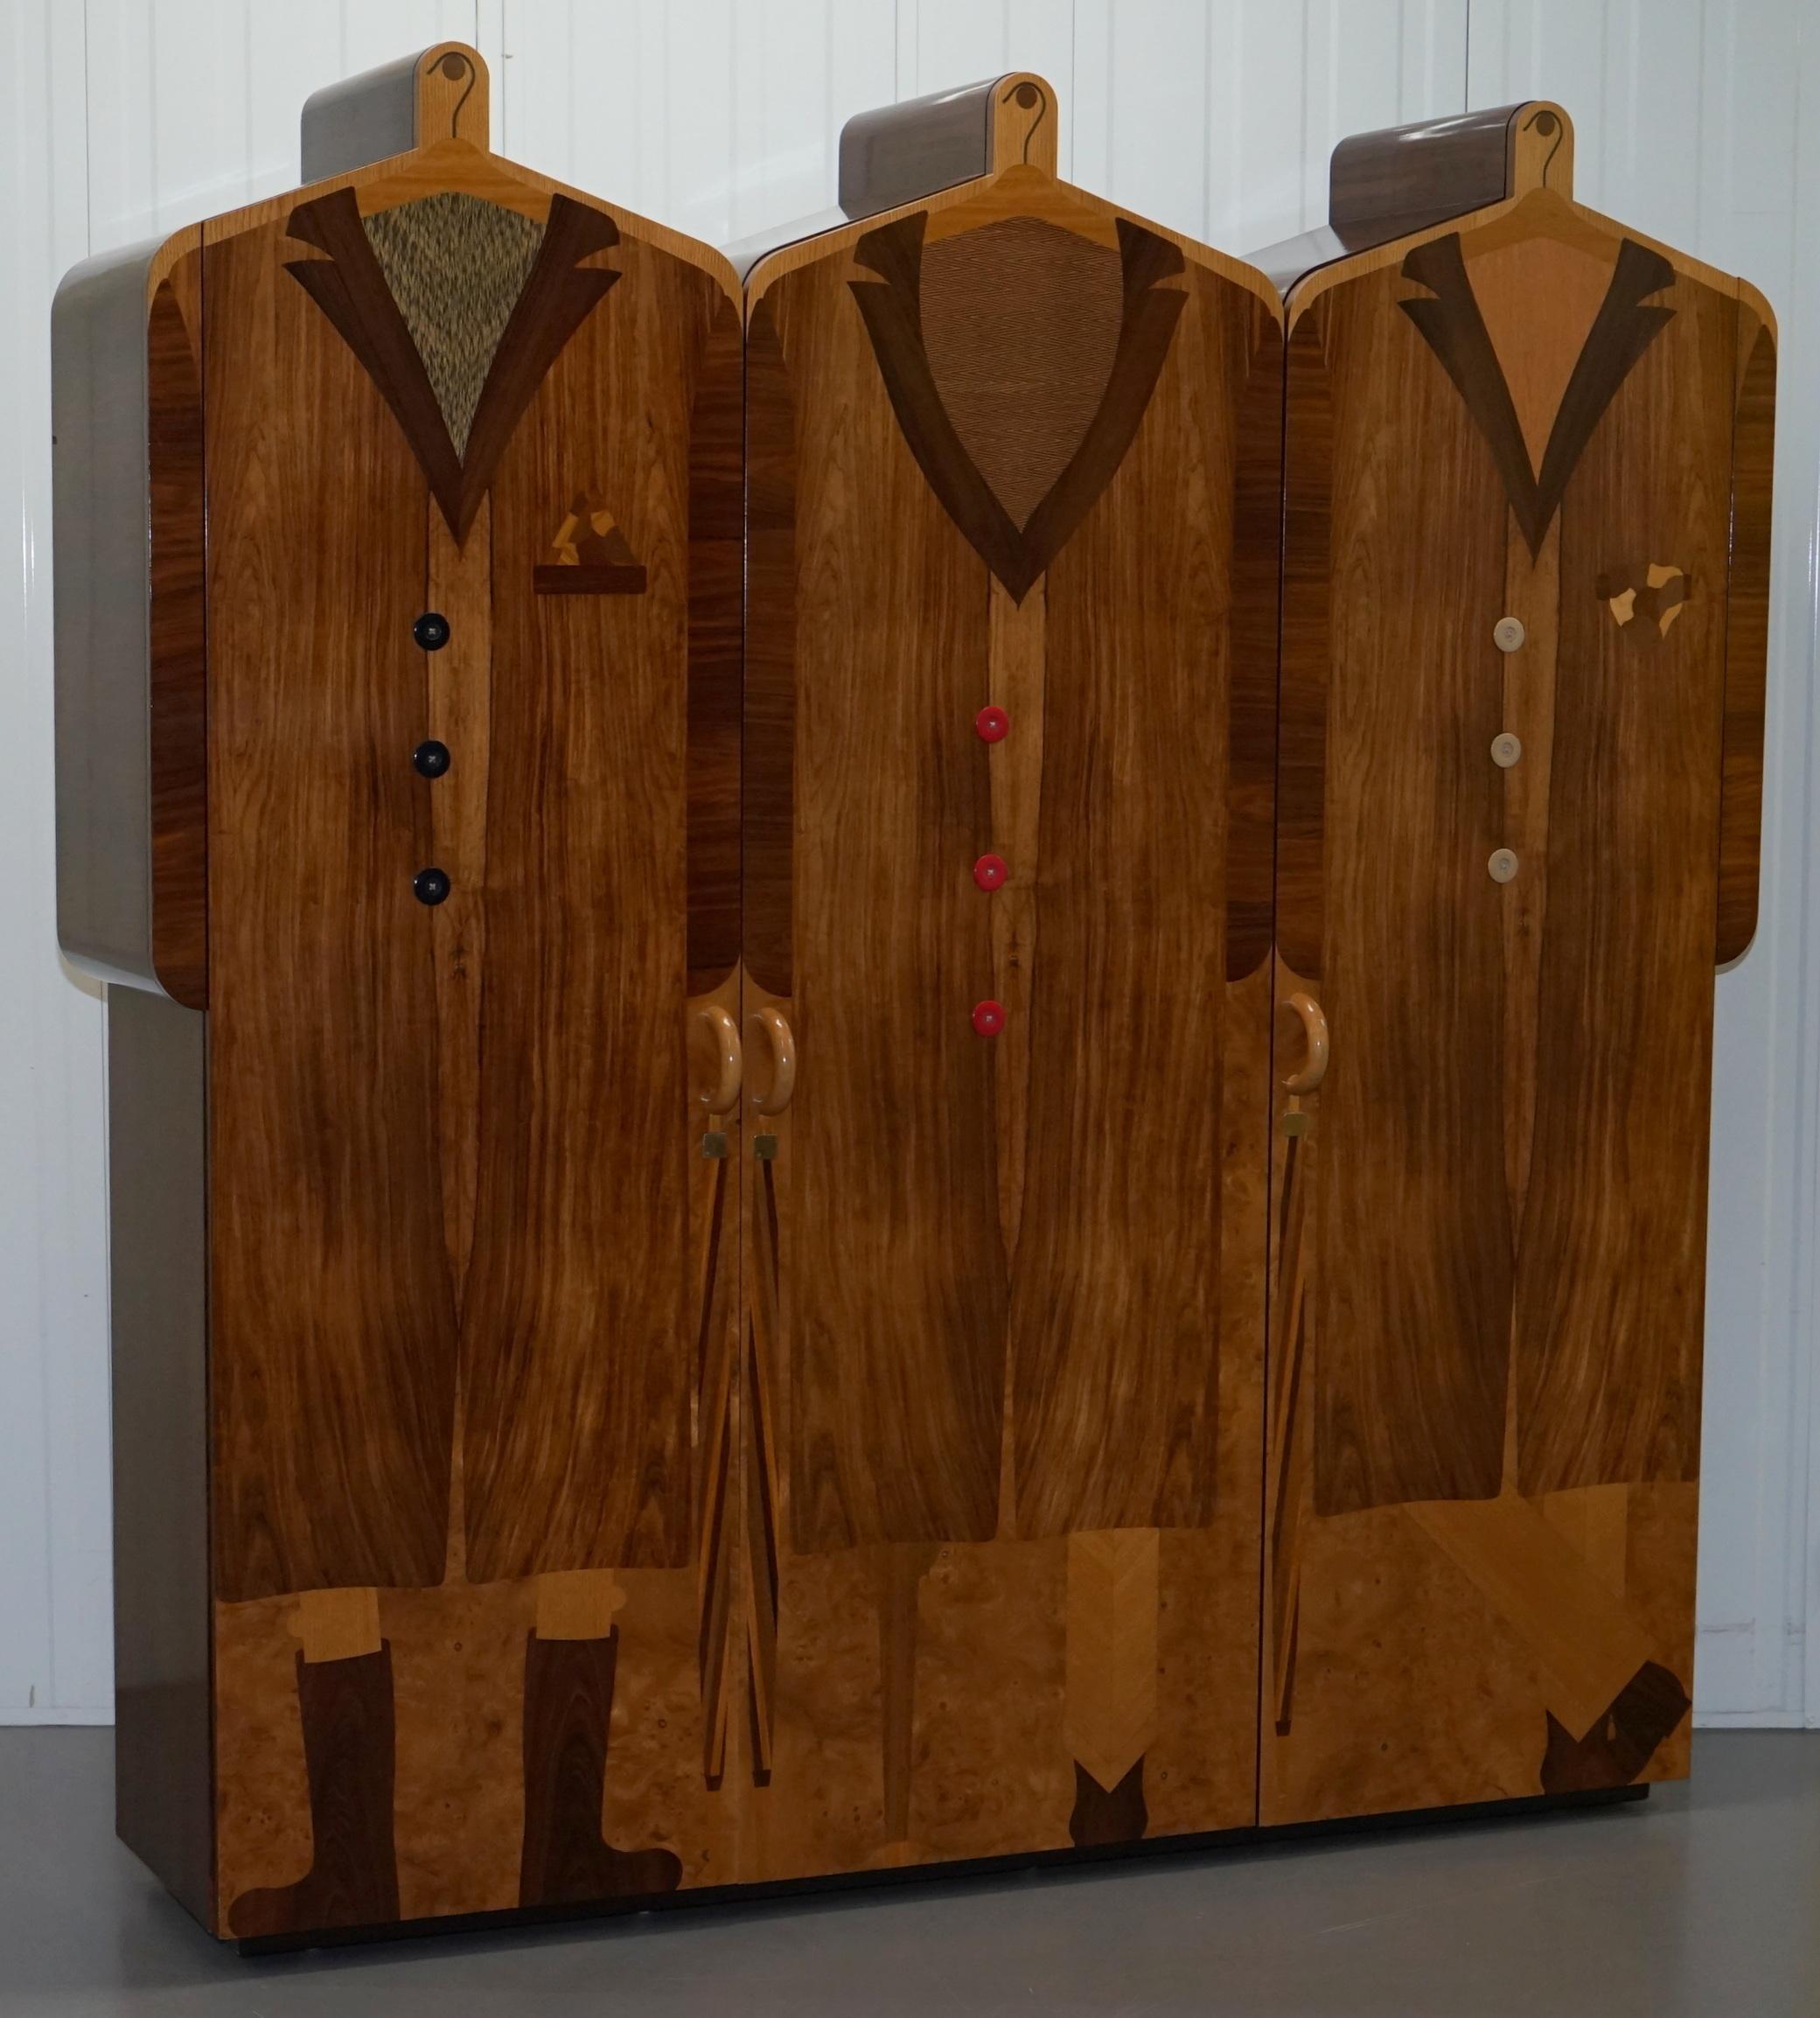 We are delighted to offer for sale this absolutely stunning original Signed and dated Andrew Varah 1989 Umbrella Men Rosewood wardrobe

This piece is pretty, the coolest piece of Art furniture I have ever seen, the pictures don’t come close to